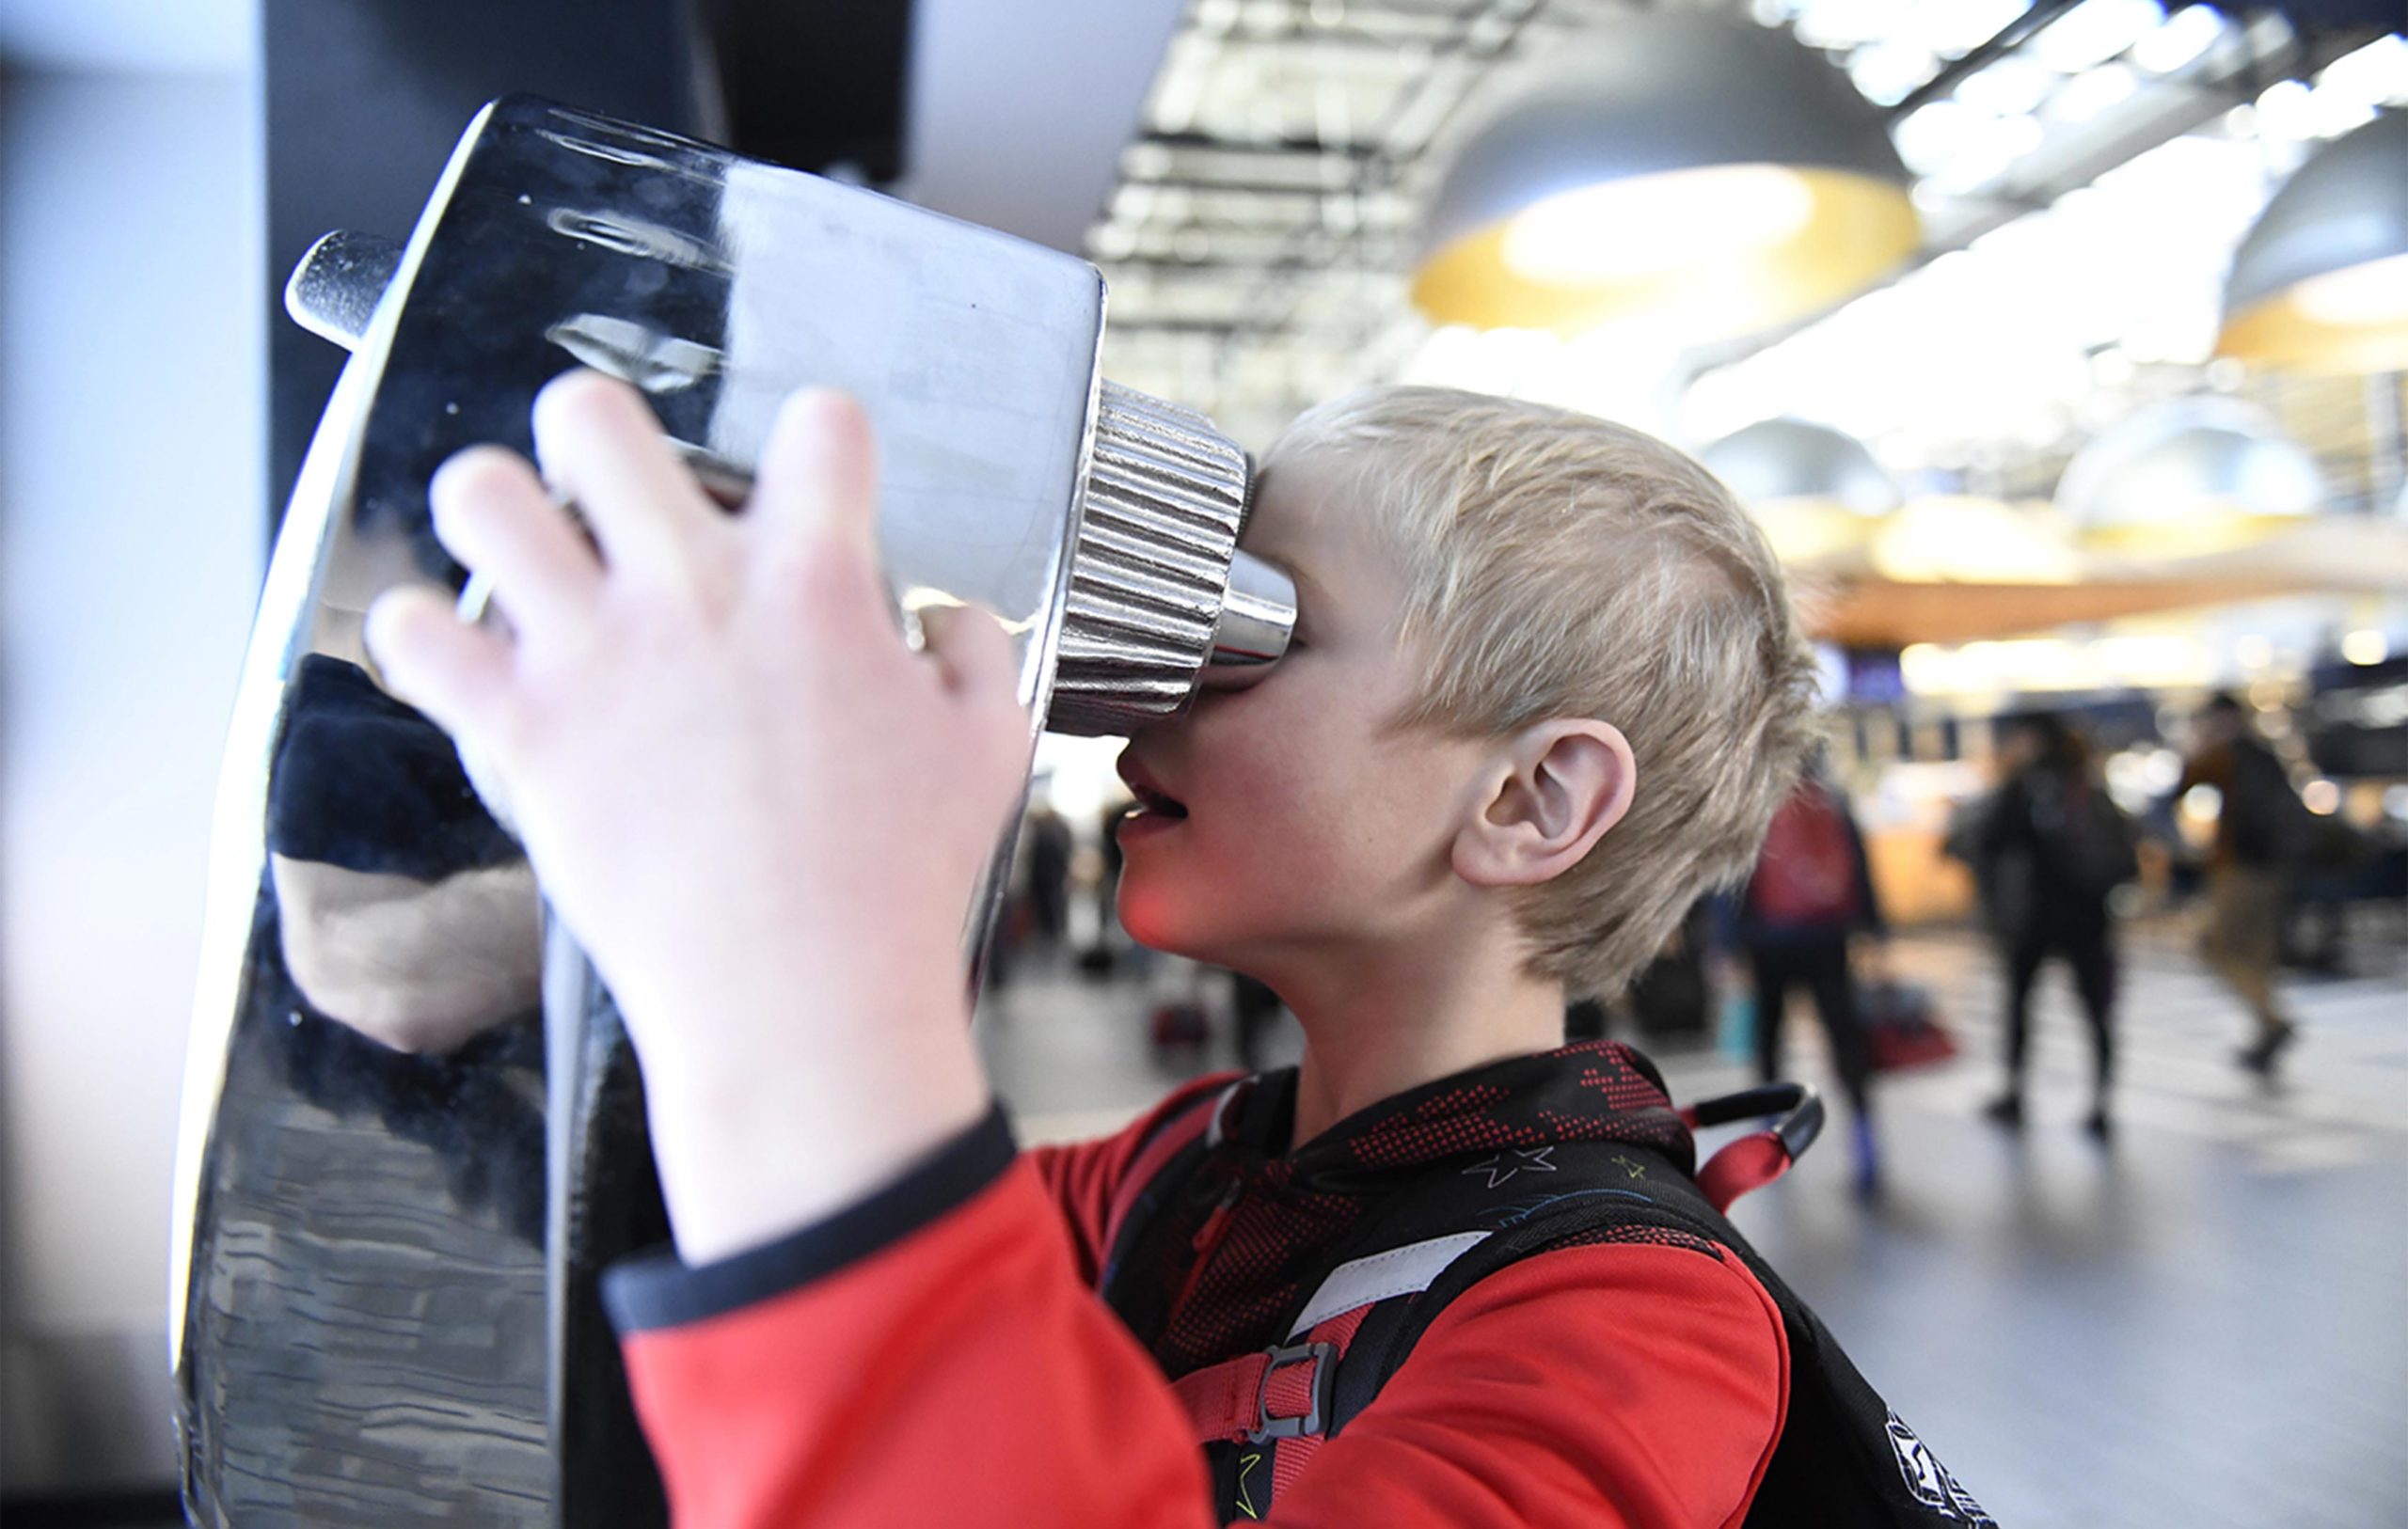 New-Thought-Visit-Jackson-Hole-Stay-Wild-Campaign-Child-Using-VRnocular-In-Airport-fullscreen